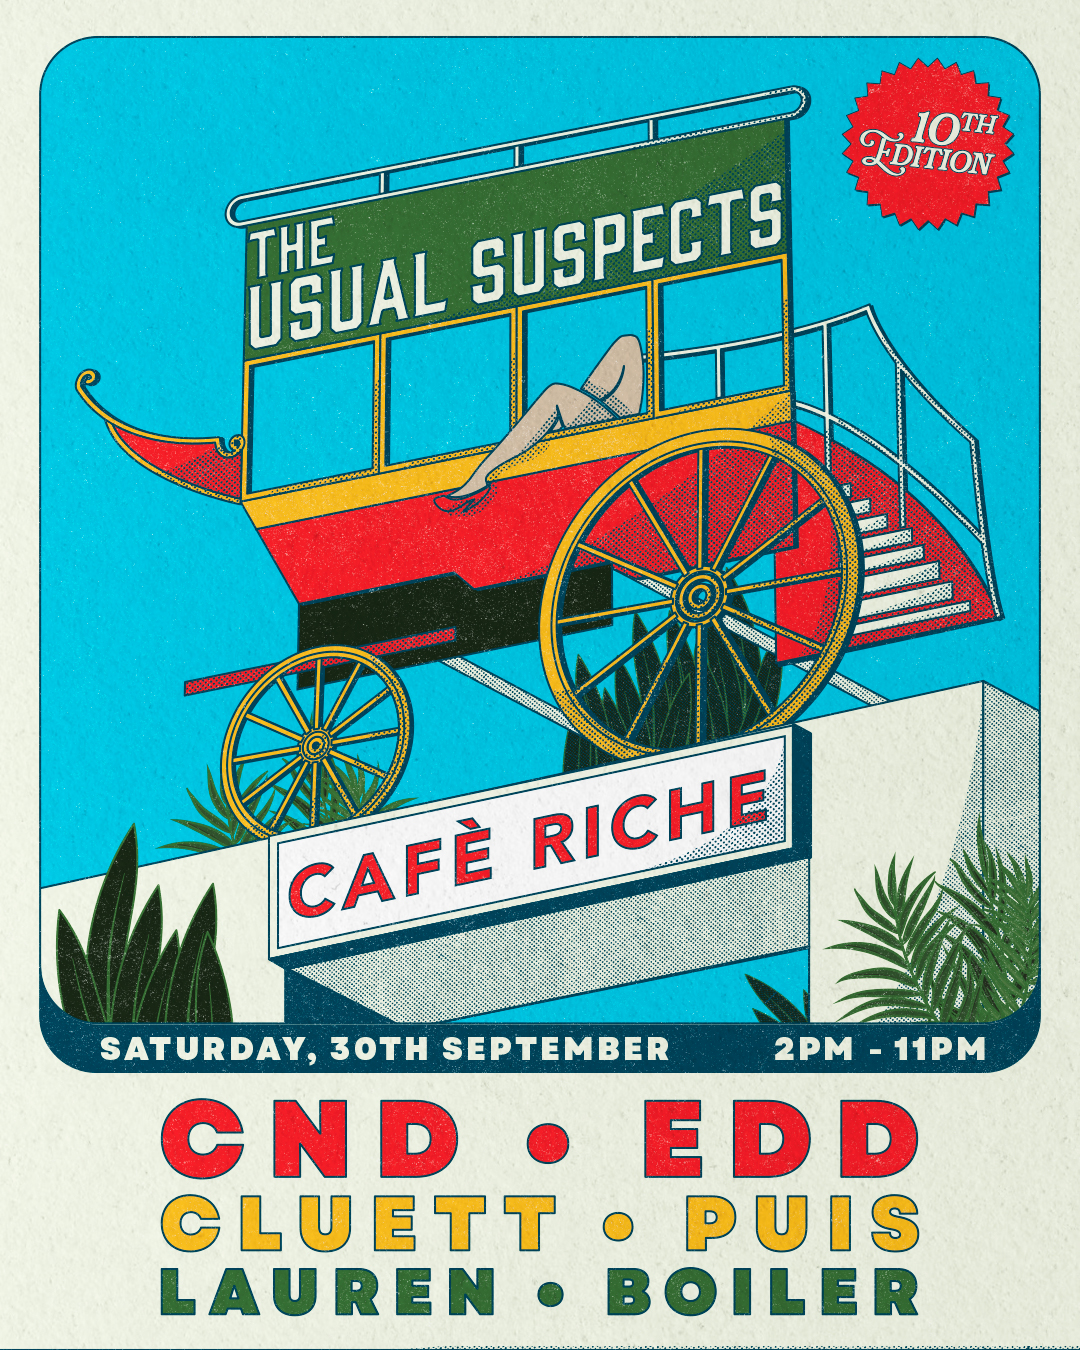 The Usual Suspects 10th Edition - Cafe Riche poster